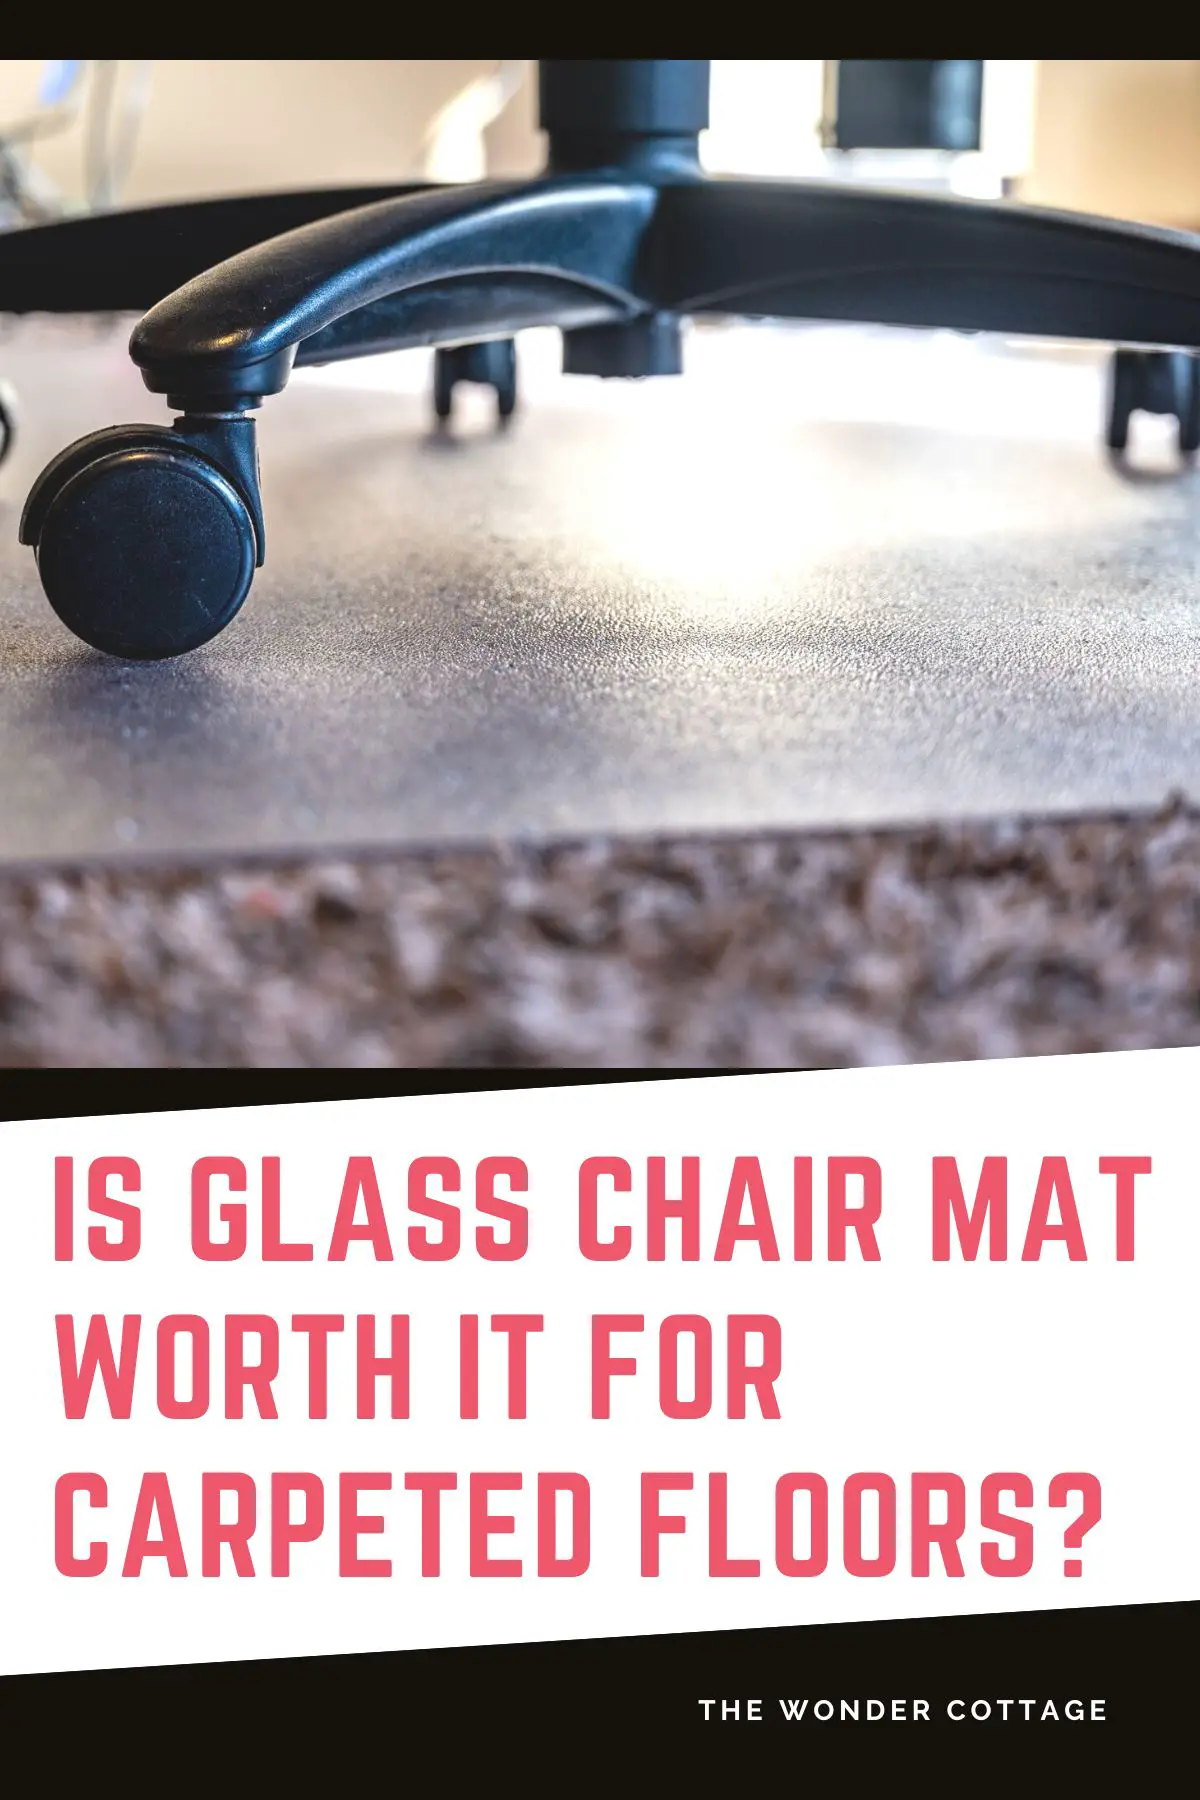 Is Glass Chair Mat Worth It For Carpeted Floors?